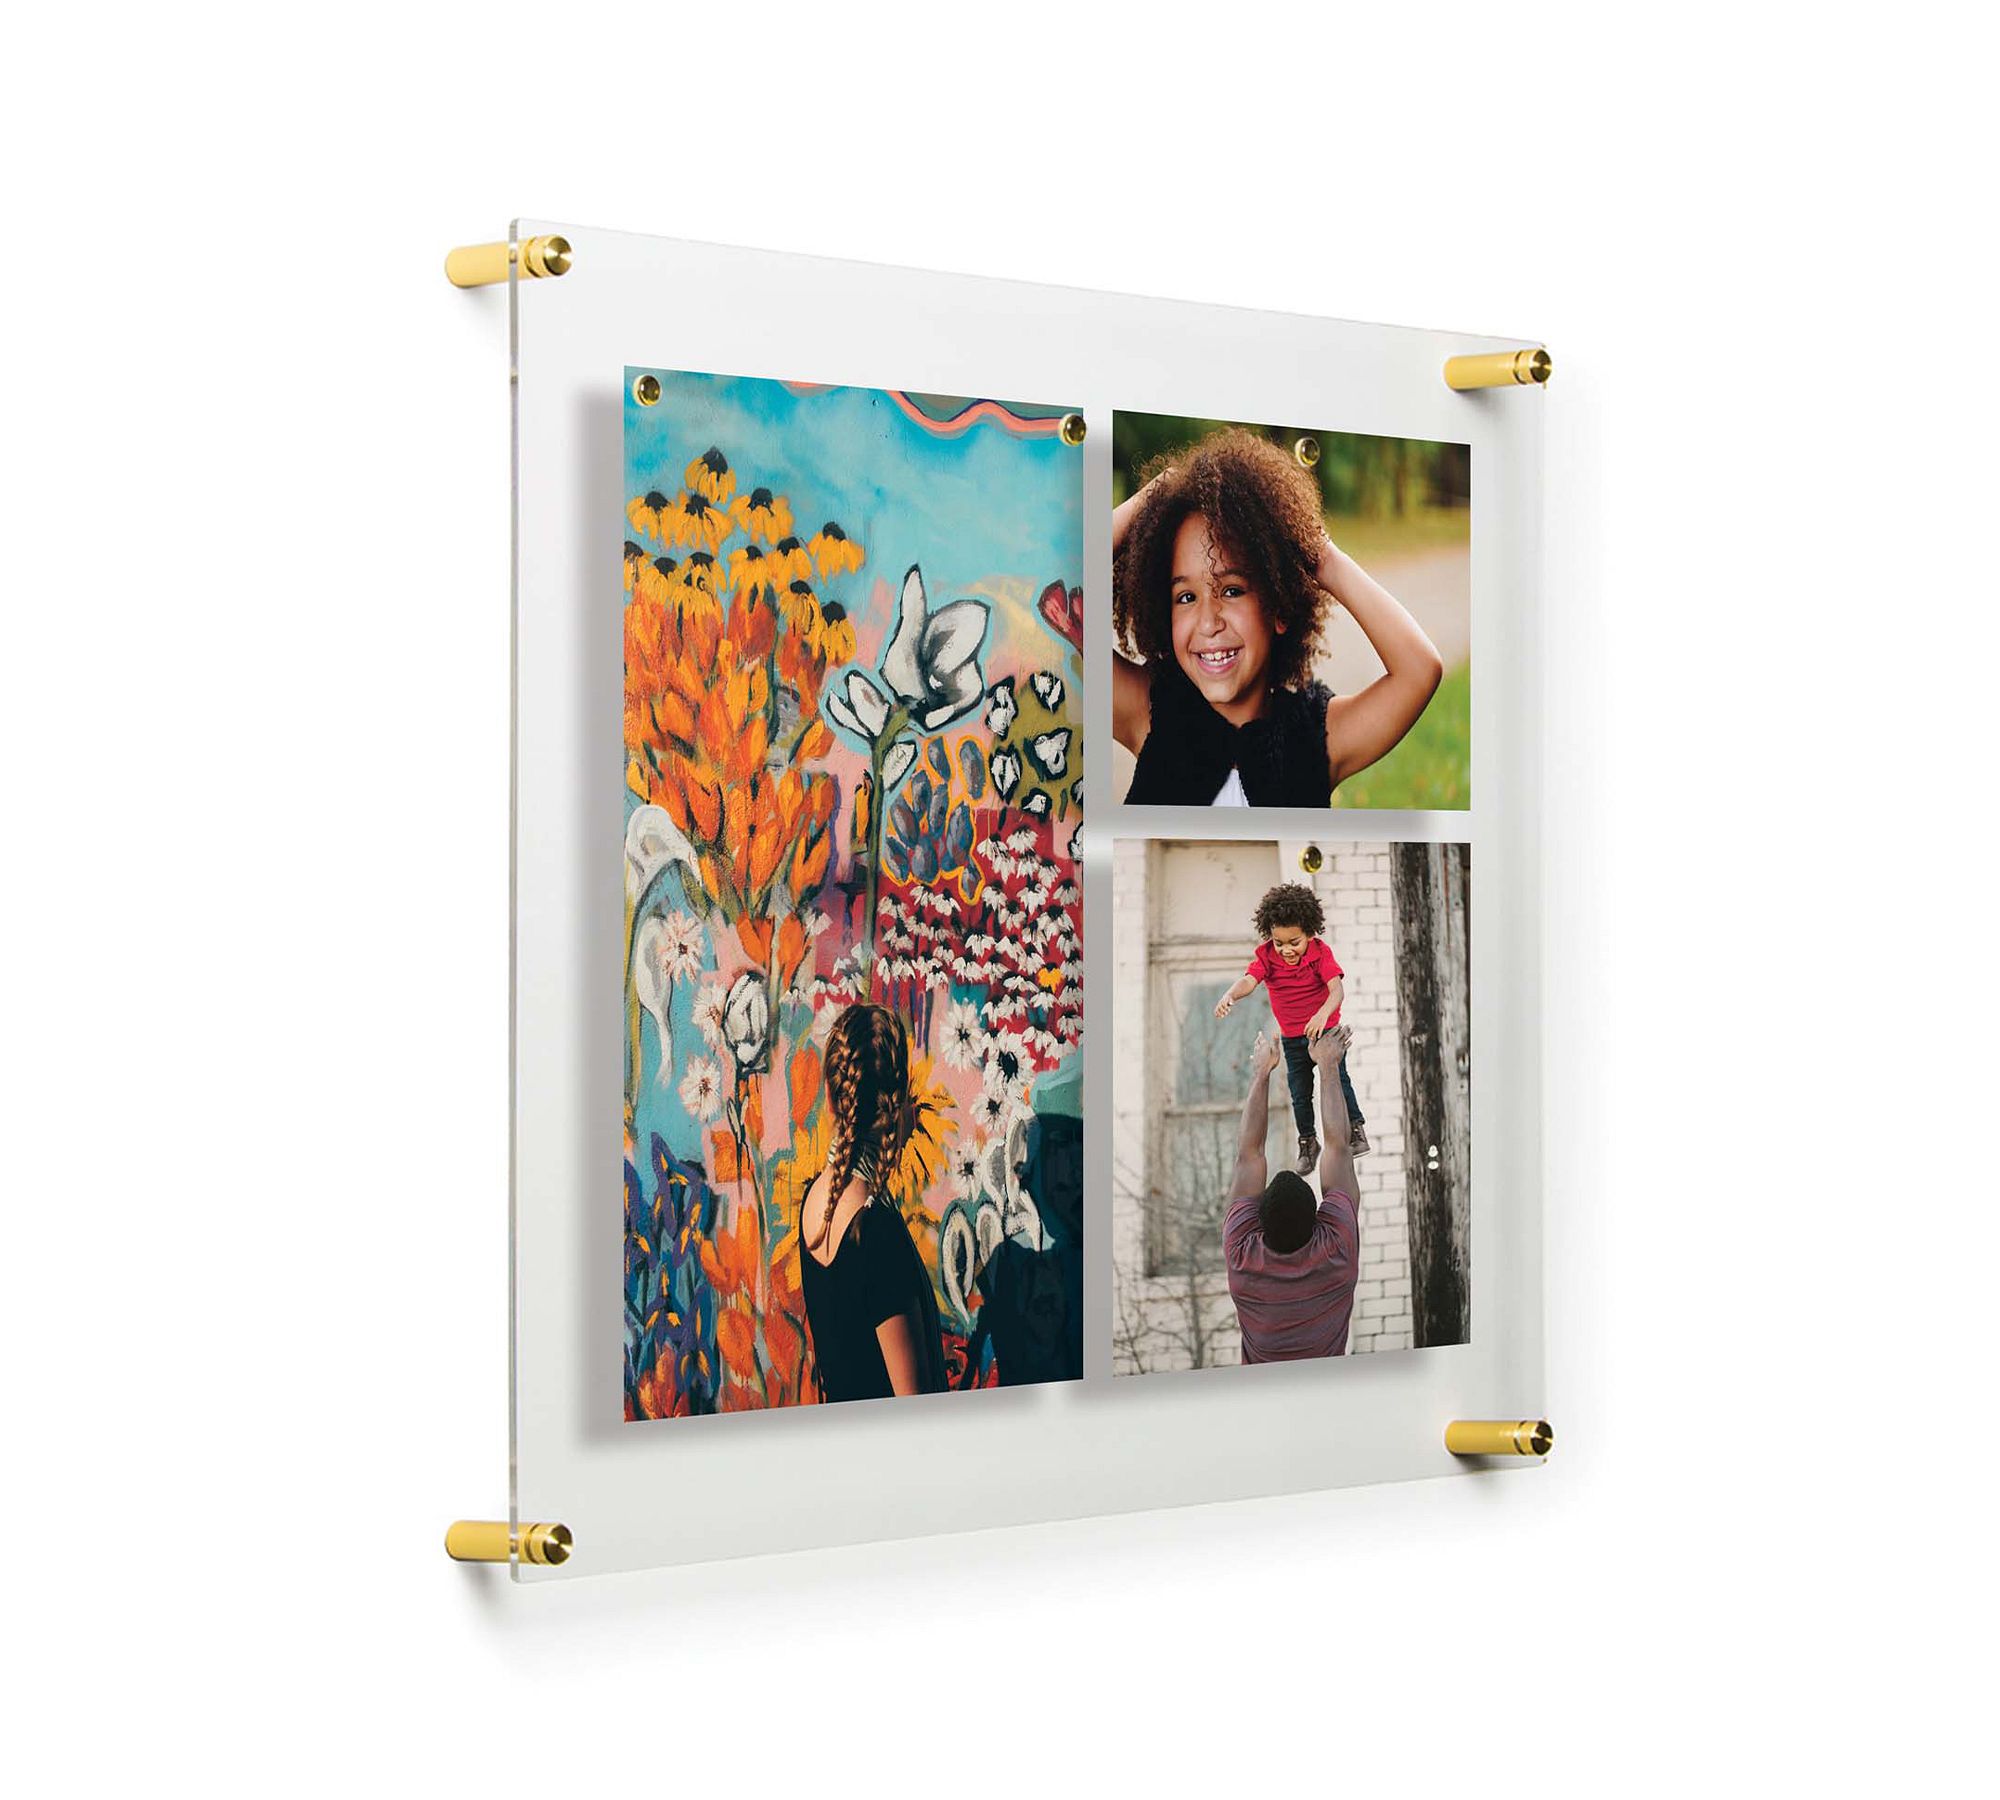 Acrylic Floating Single Panel Gallery Frames with Magnets